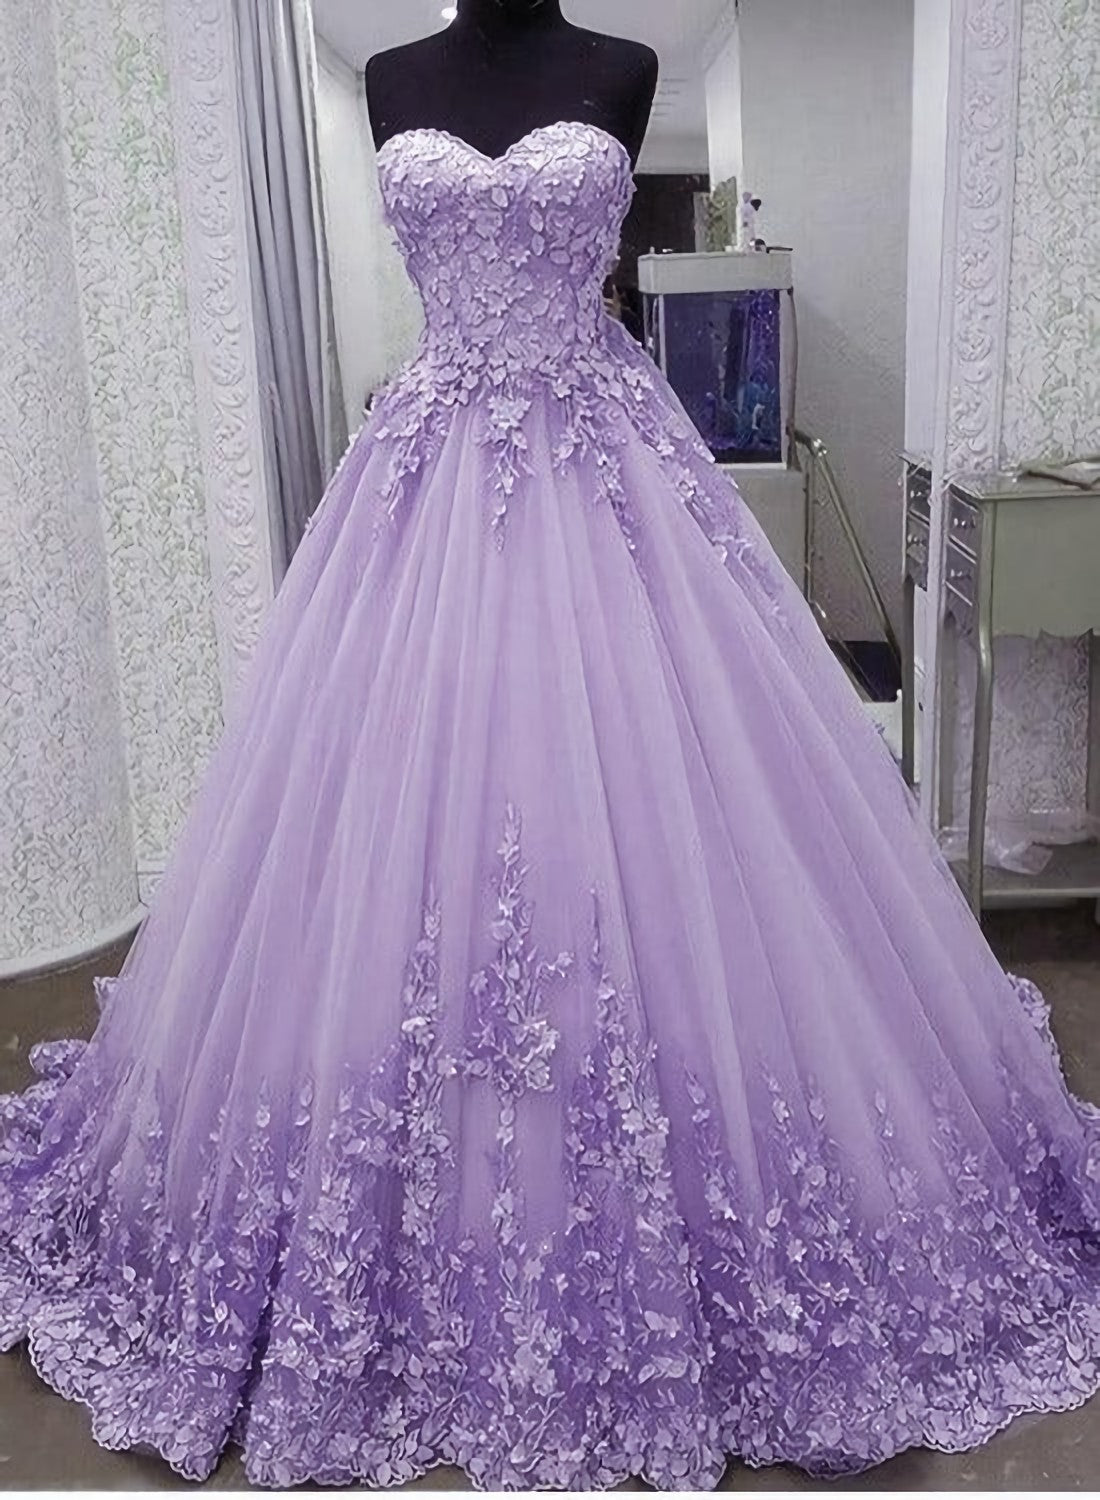 Formal Dresses On Sale, Light Purple Tulle With Flowers Lace Ball Gown Sweet 16 Gown Long Evening Dresses